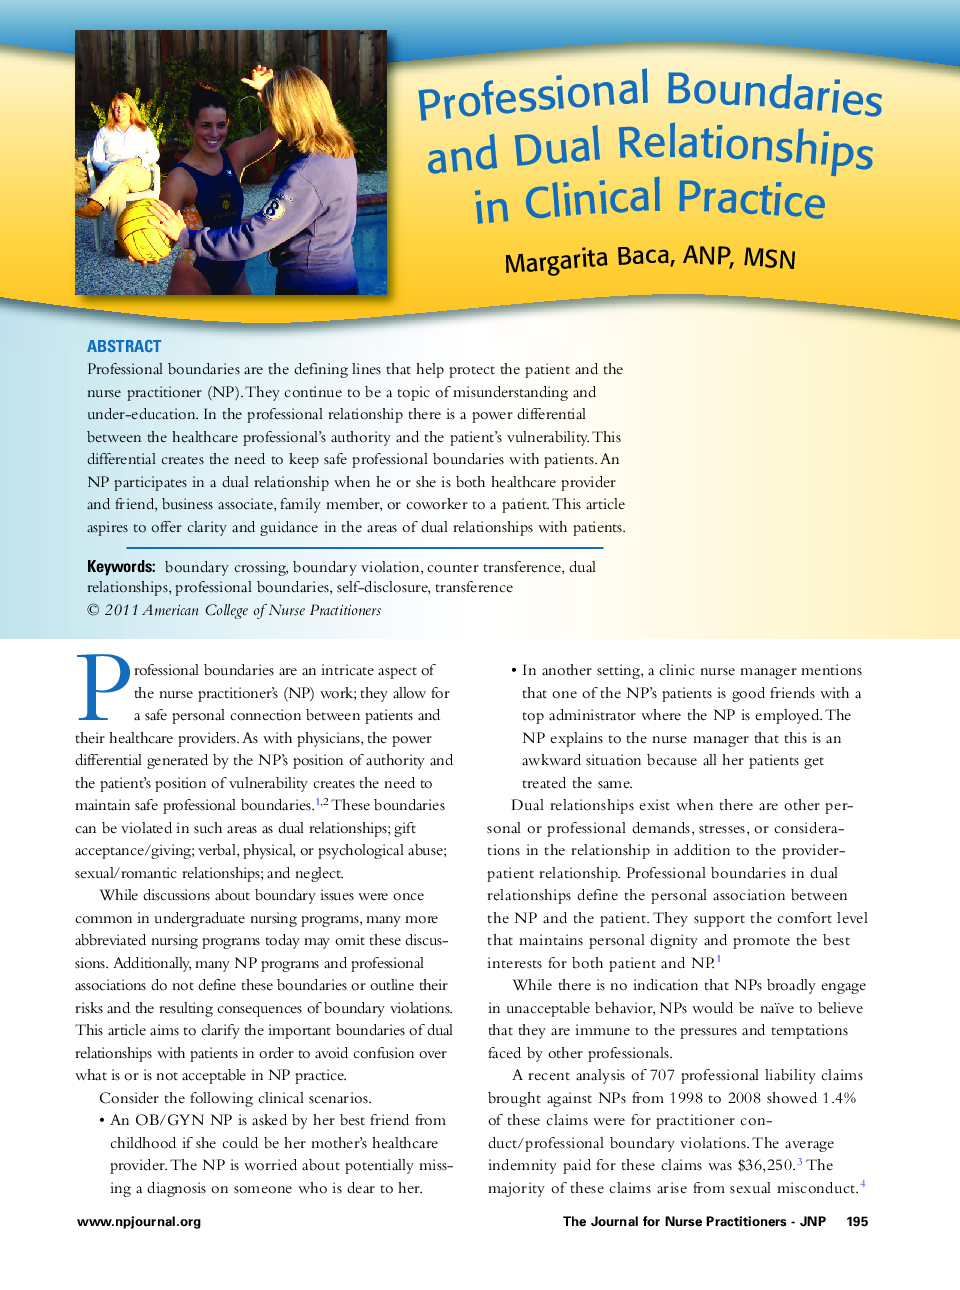 Professional Boundaries and Dual Relationships in Clinical Practice